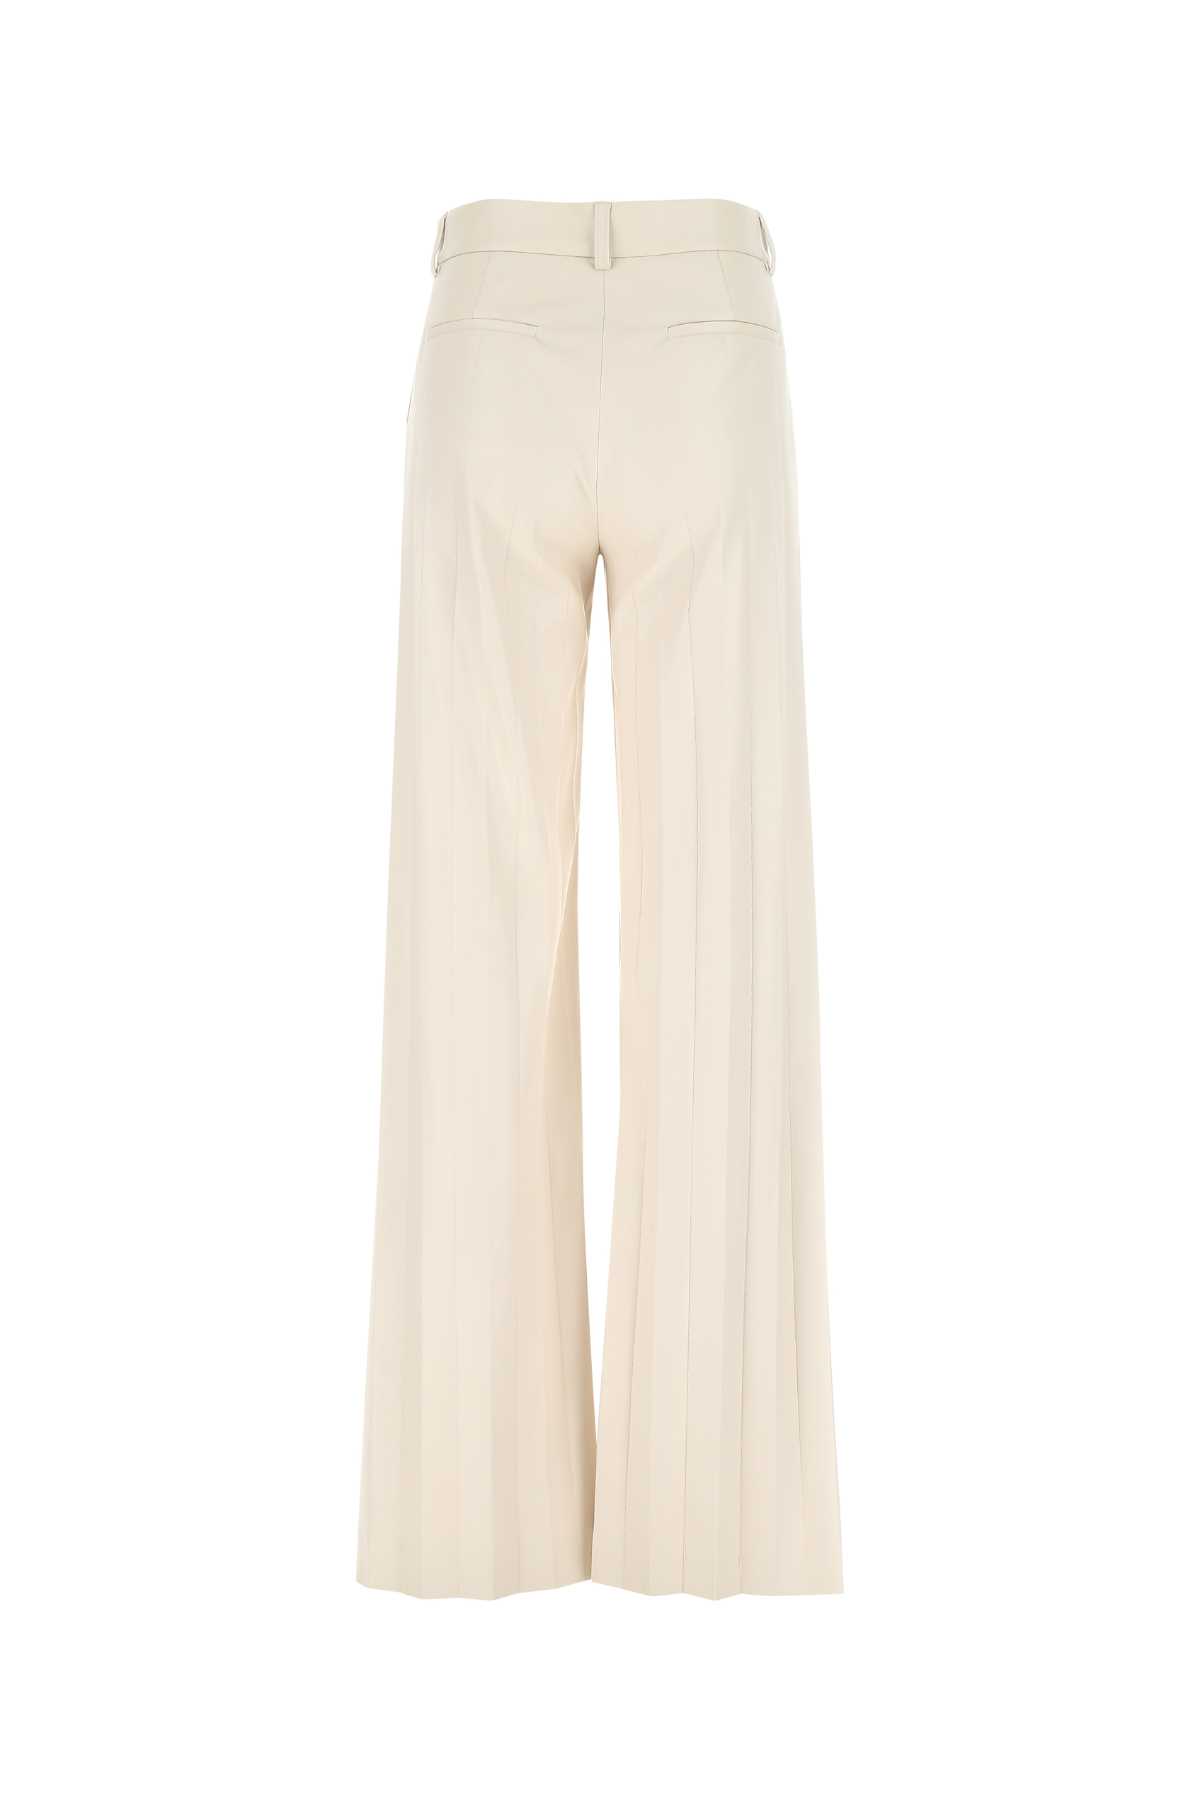 Msgm Ivory Synthetic Leather Trouser In 02